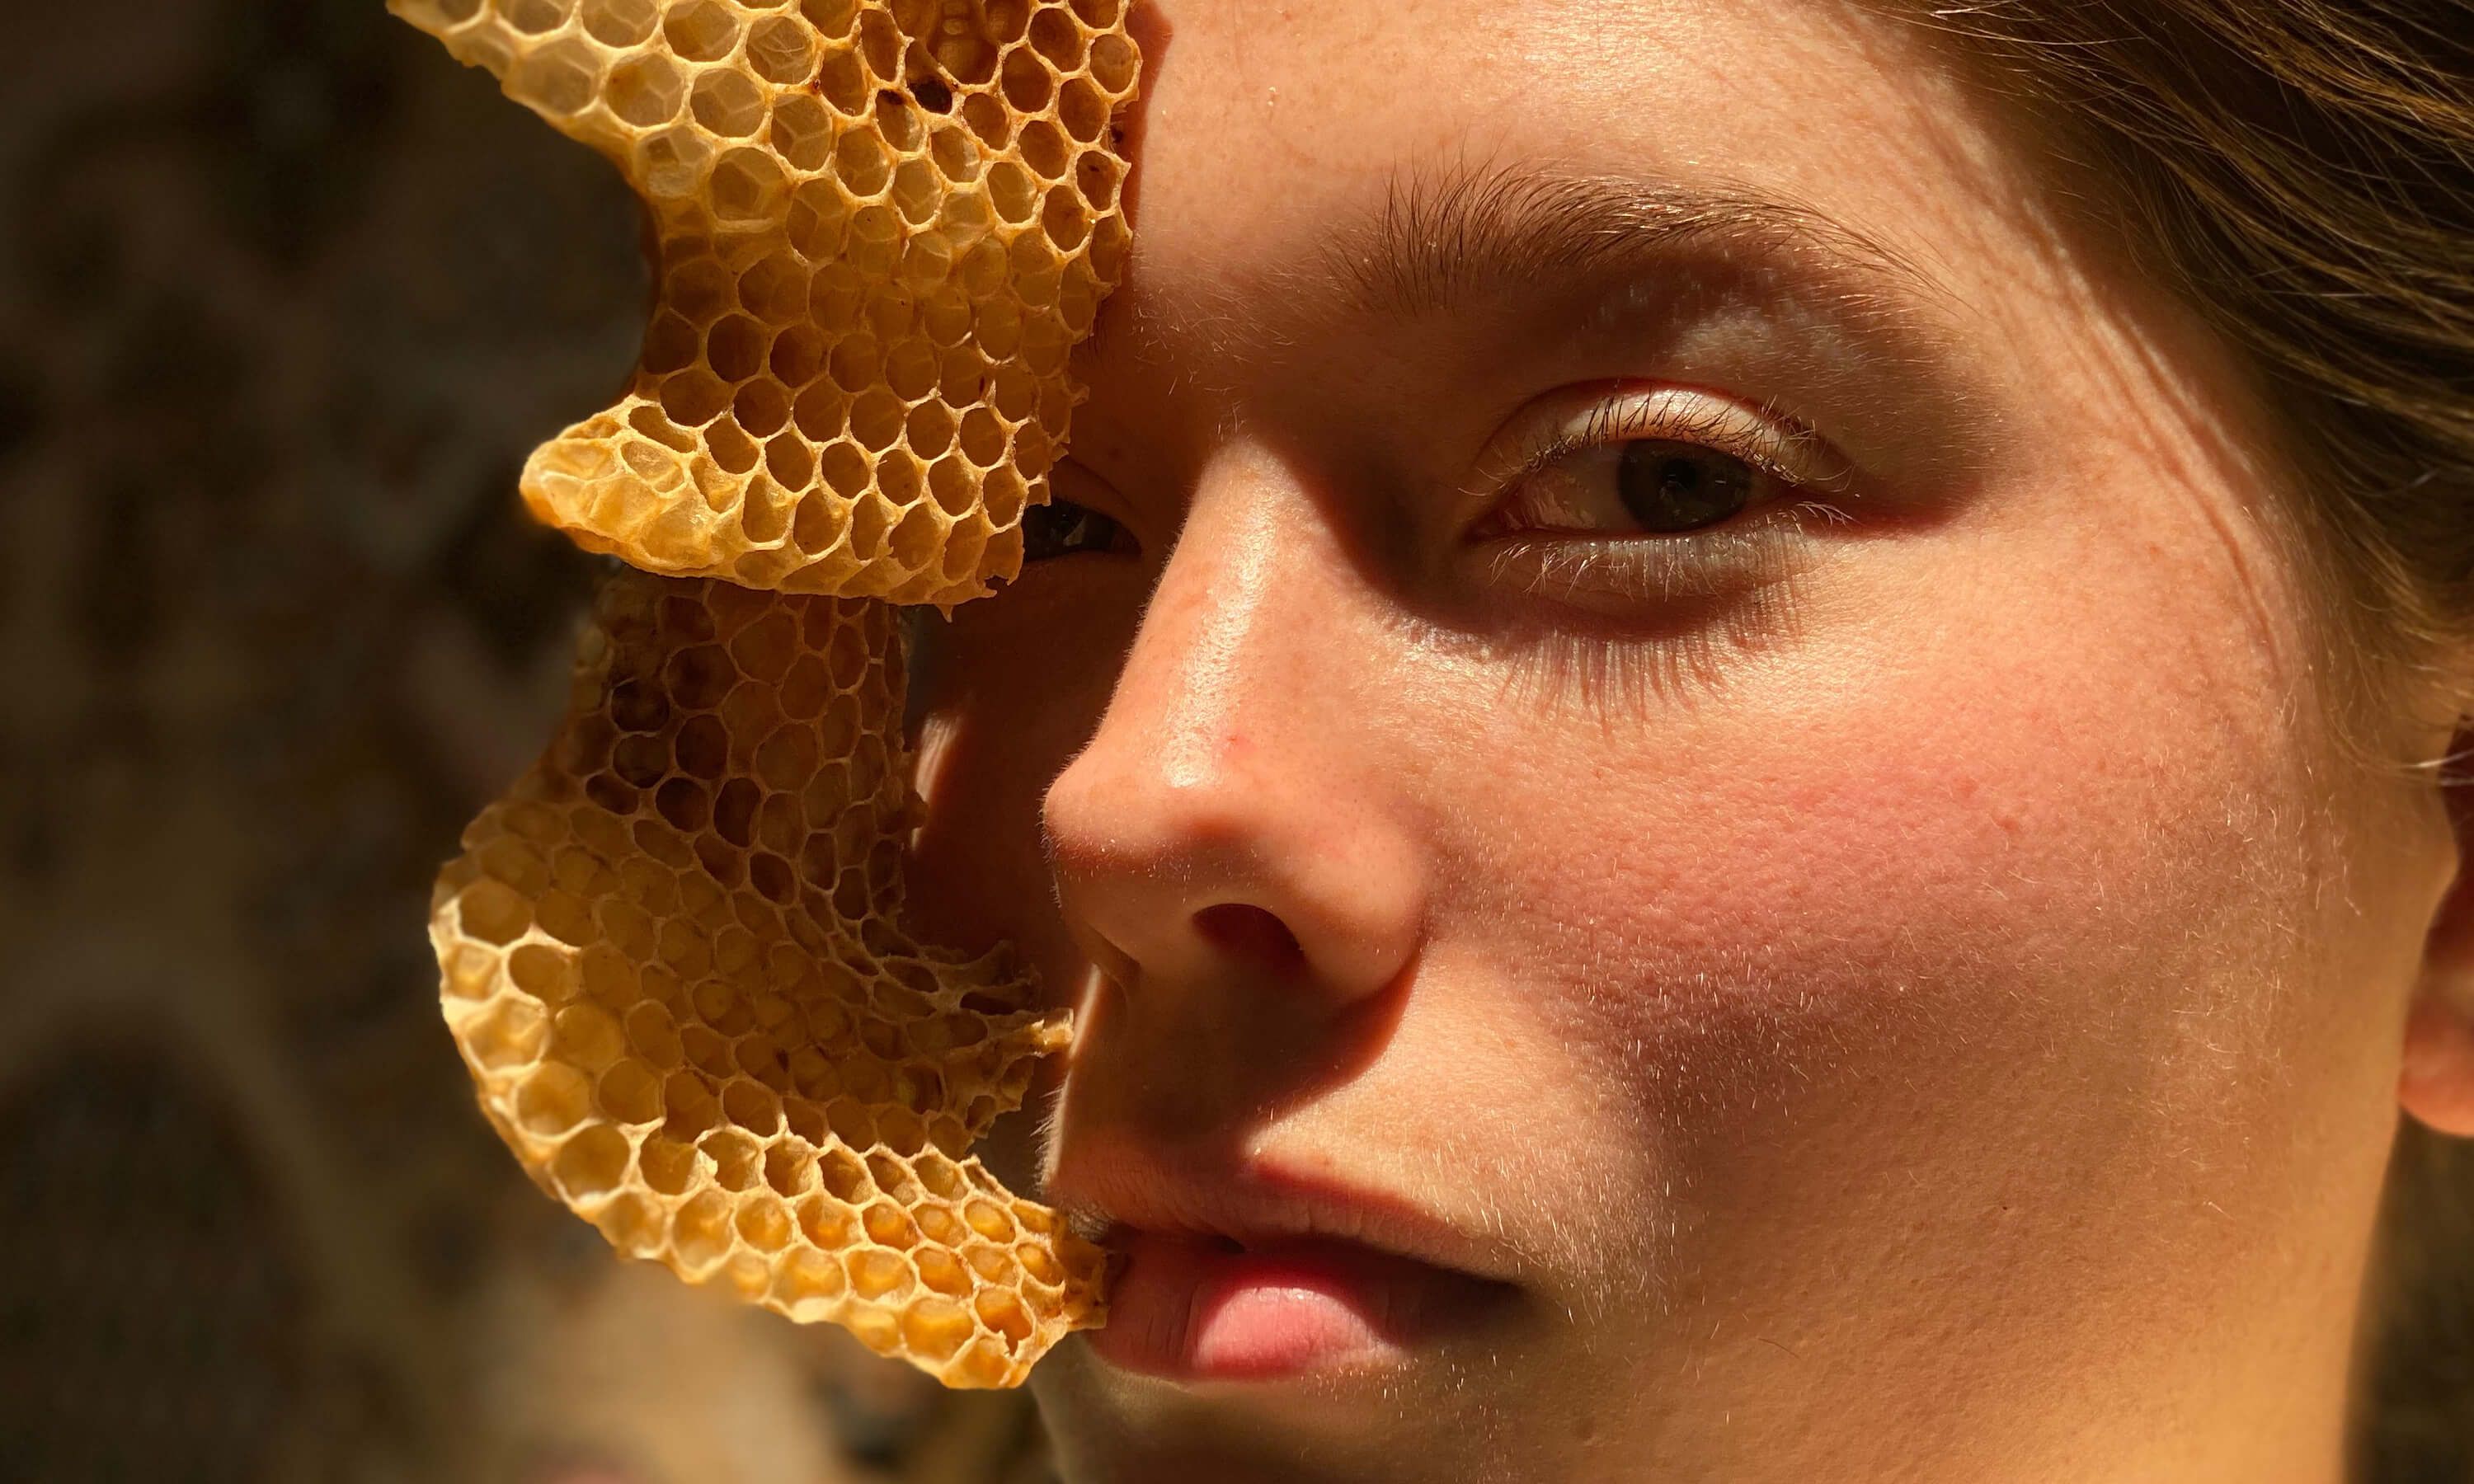 The Beekeeper Using Art to Bring People Closer to Nature